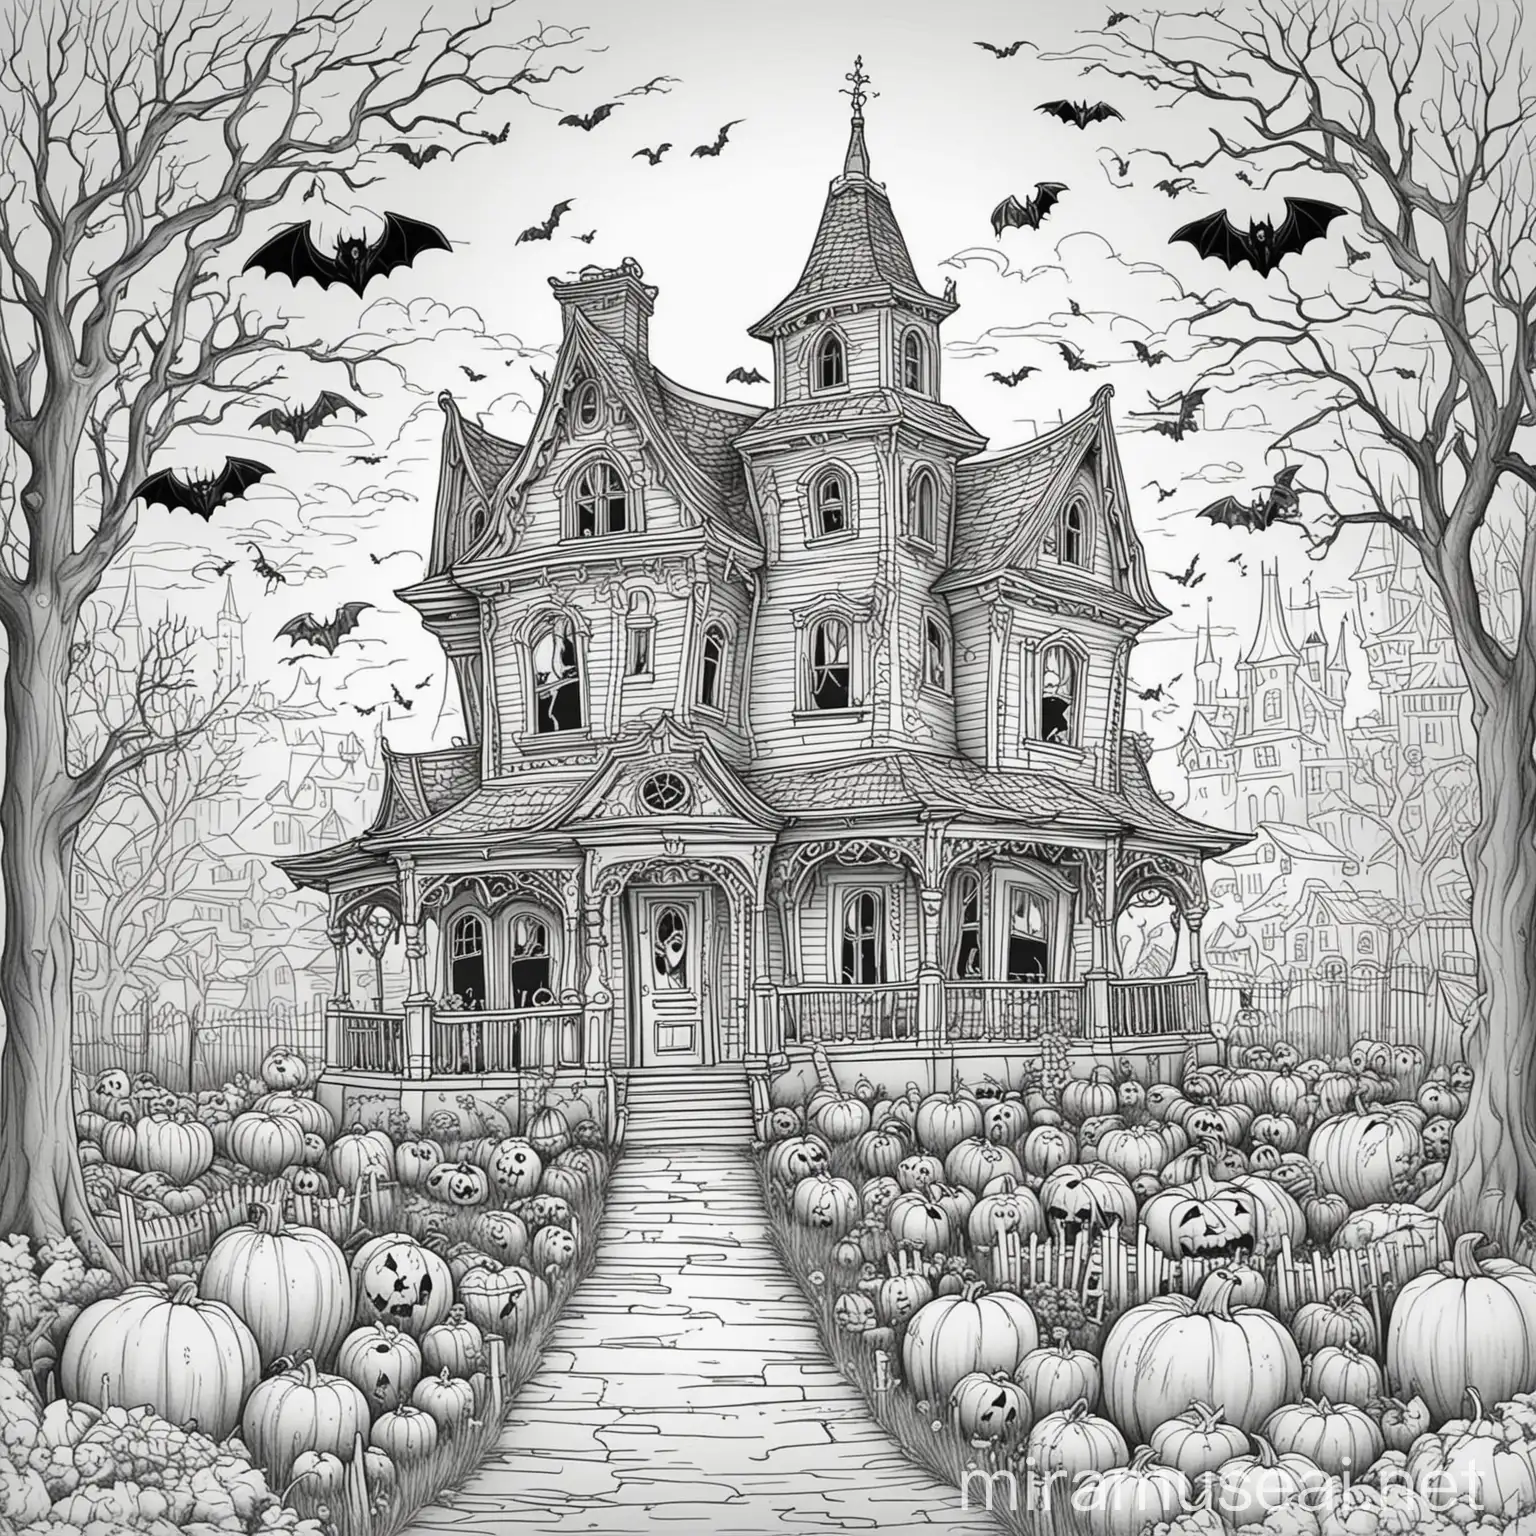 Halloween Coloring Book Page Spooky Haunted House with Flying Bats